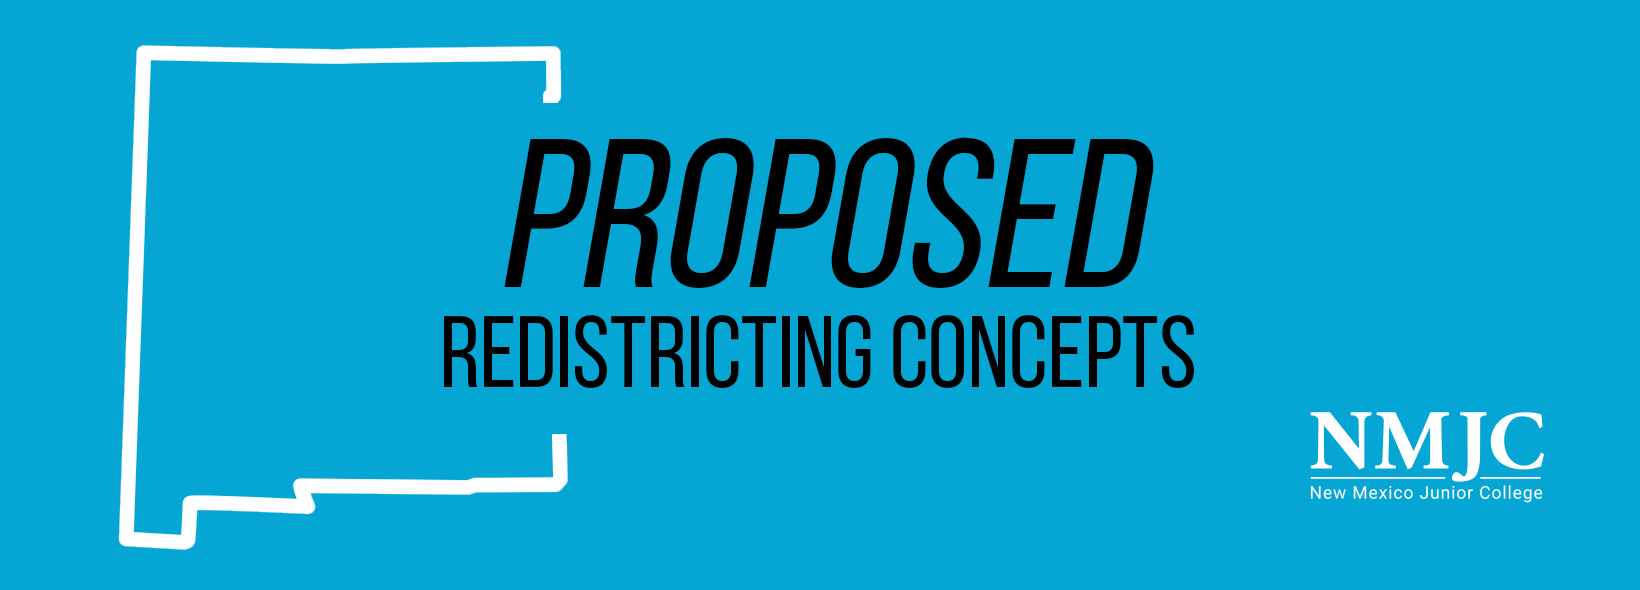 NMJC Proposed Redistricting Concepts